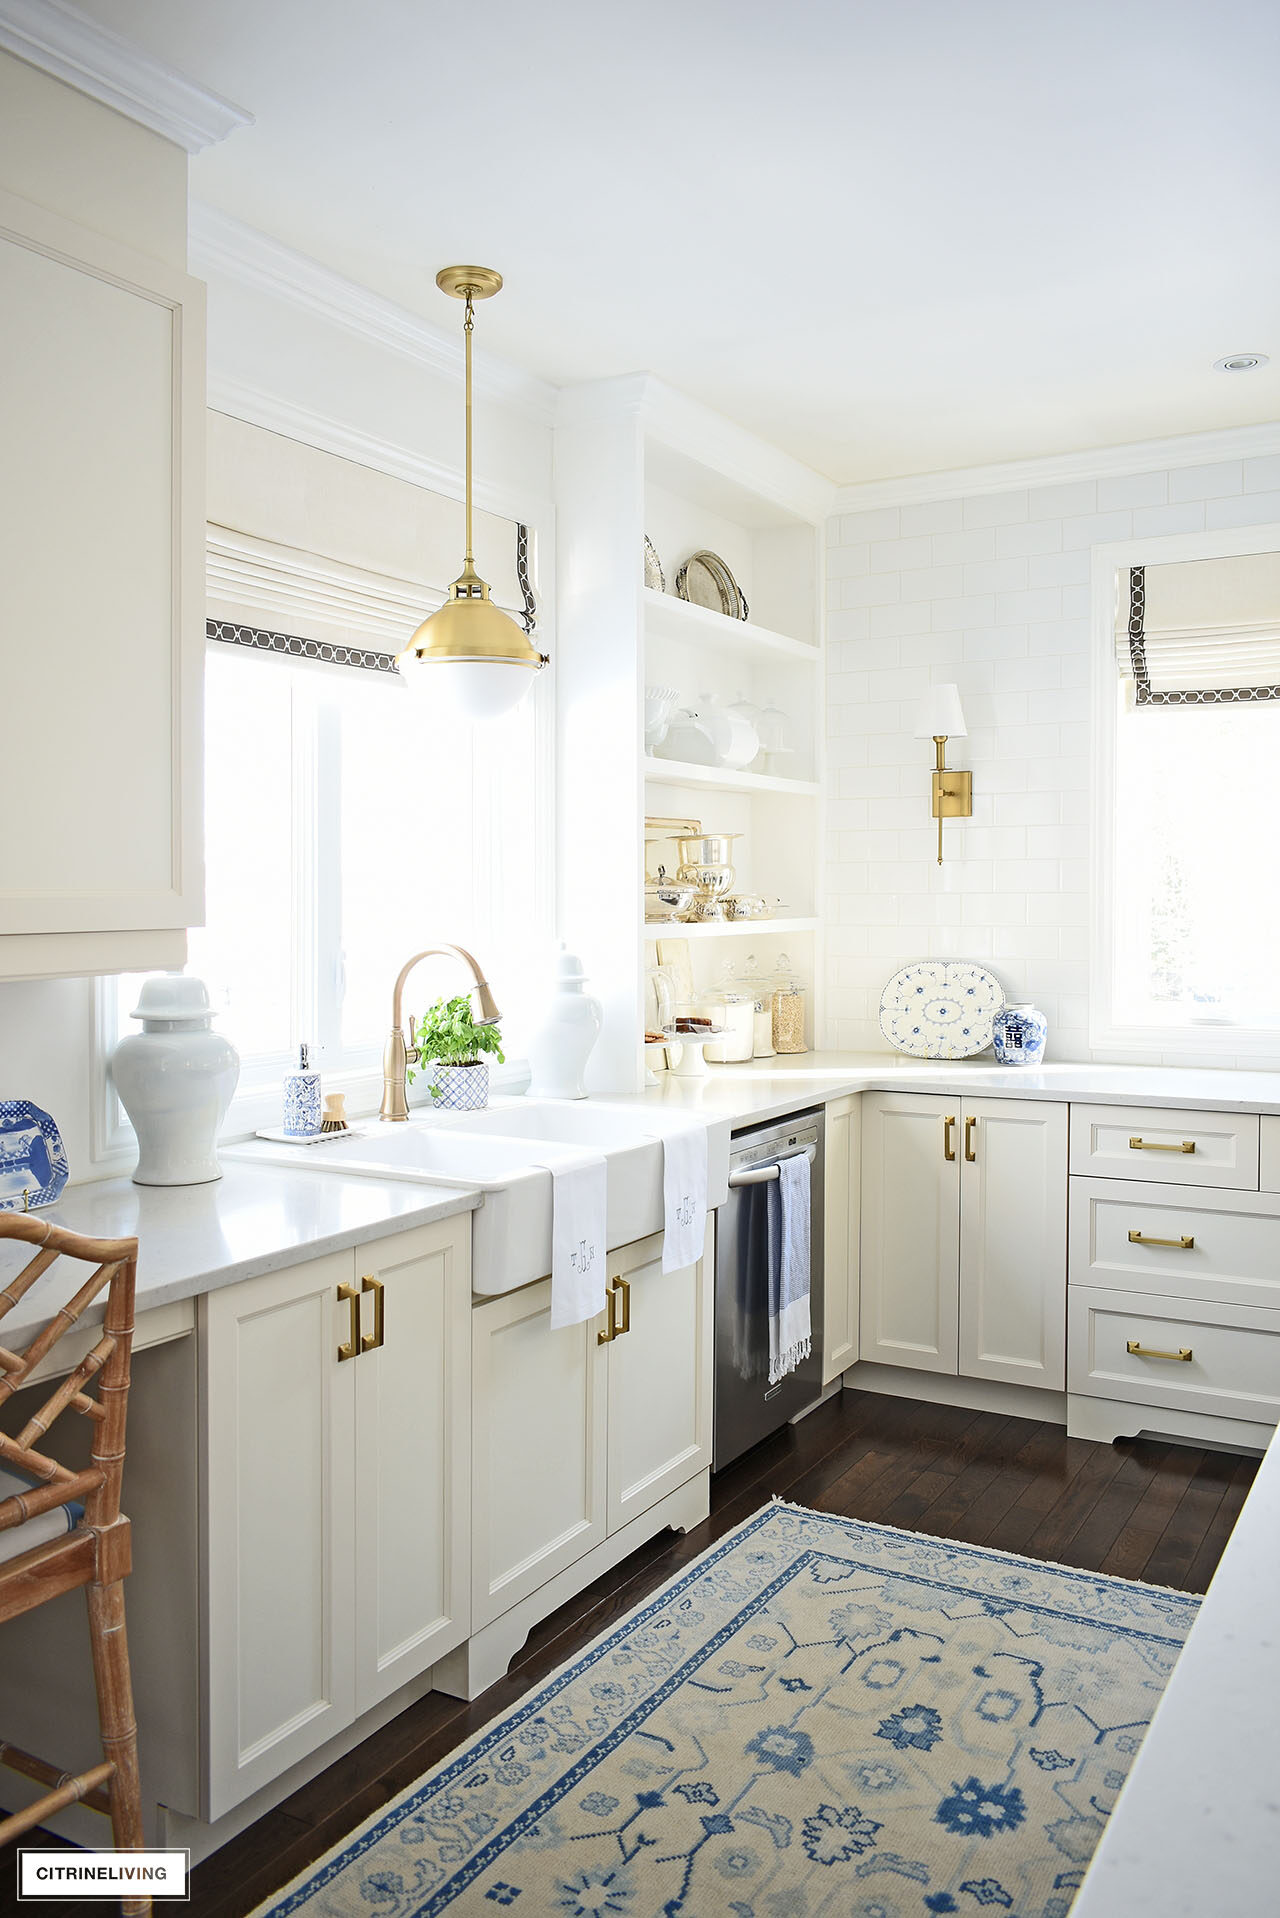 Elegant kitchen styled for spring with simple and classic decor - silver serving pieces, blue and white chinoiserie, ginger jars and monogrammed towels.